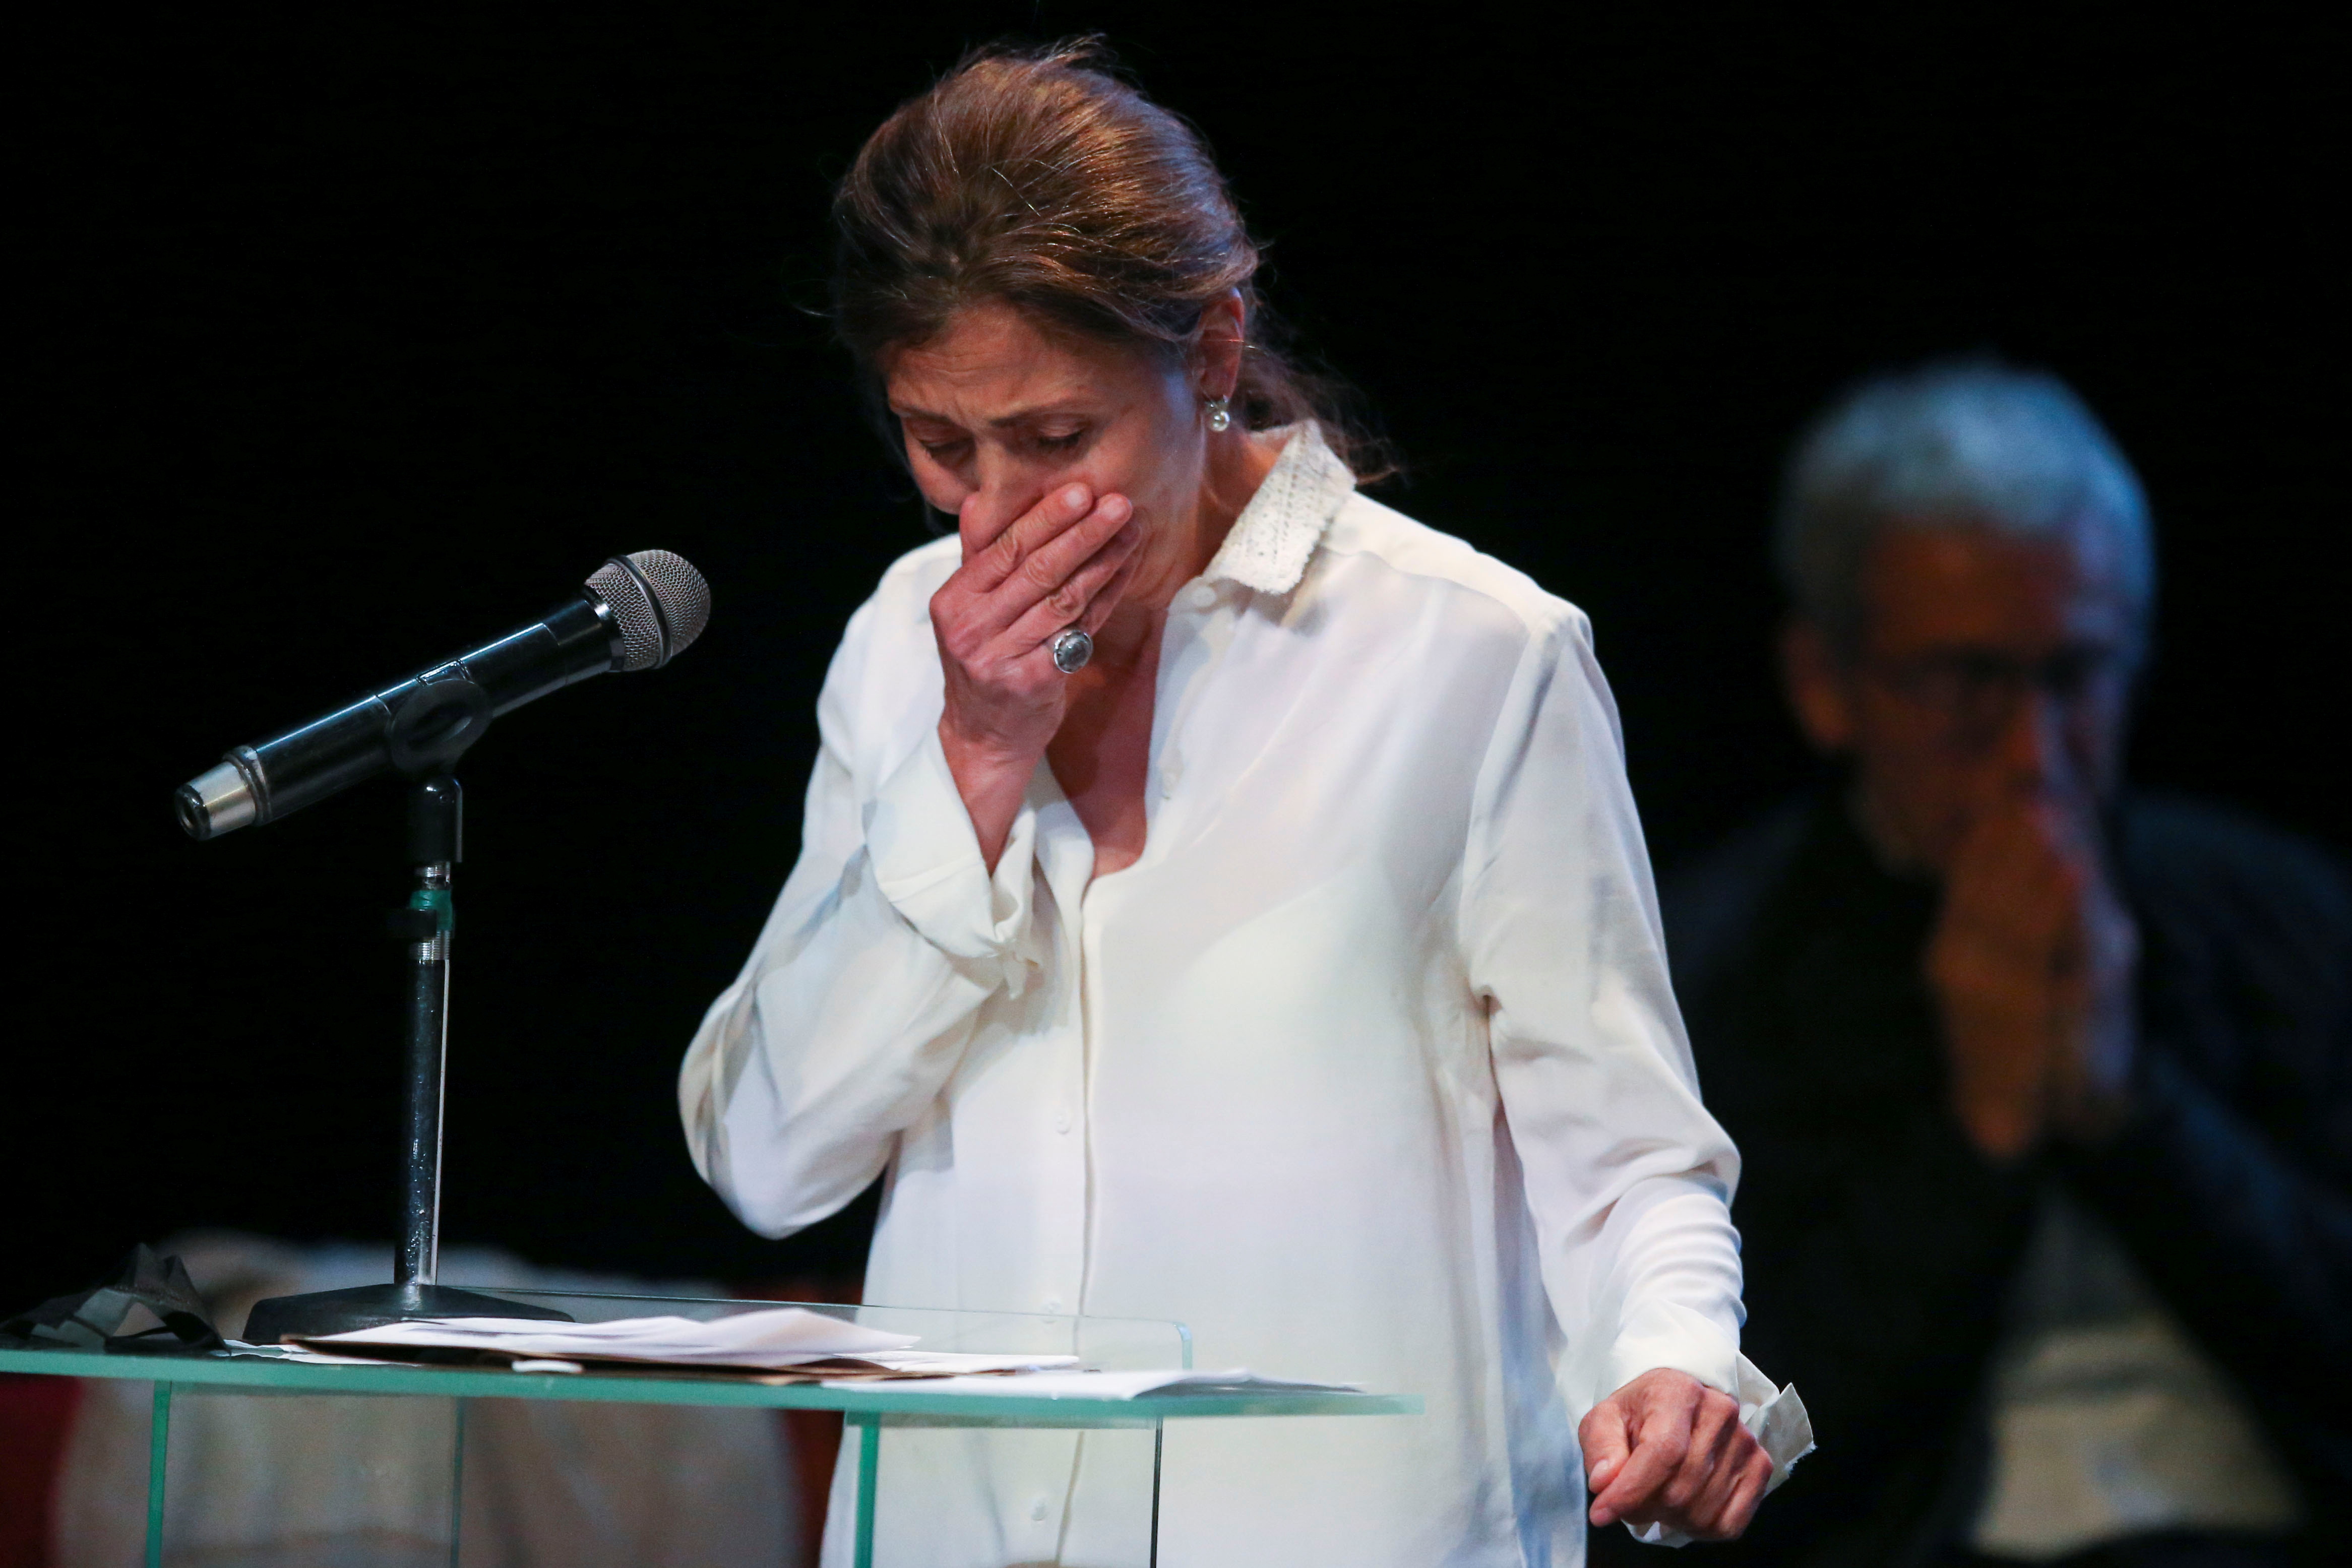 Ingrid Betancourt, French-Colombian politician and former FARC hostage, reacts as she speaks during an act of recognition with the participation of her kidnappers and their now political party Comunes, in Bogota, Colombia June 23, 2021. REUTERS/Luisa Gonzalez